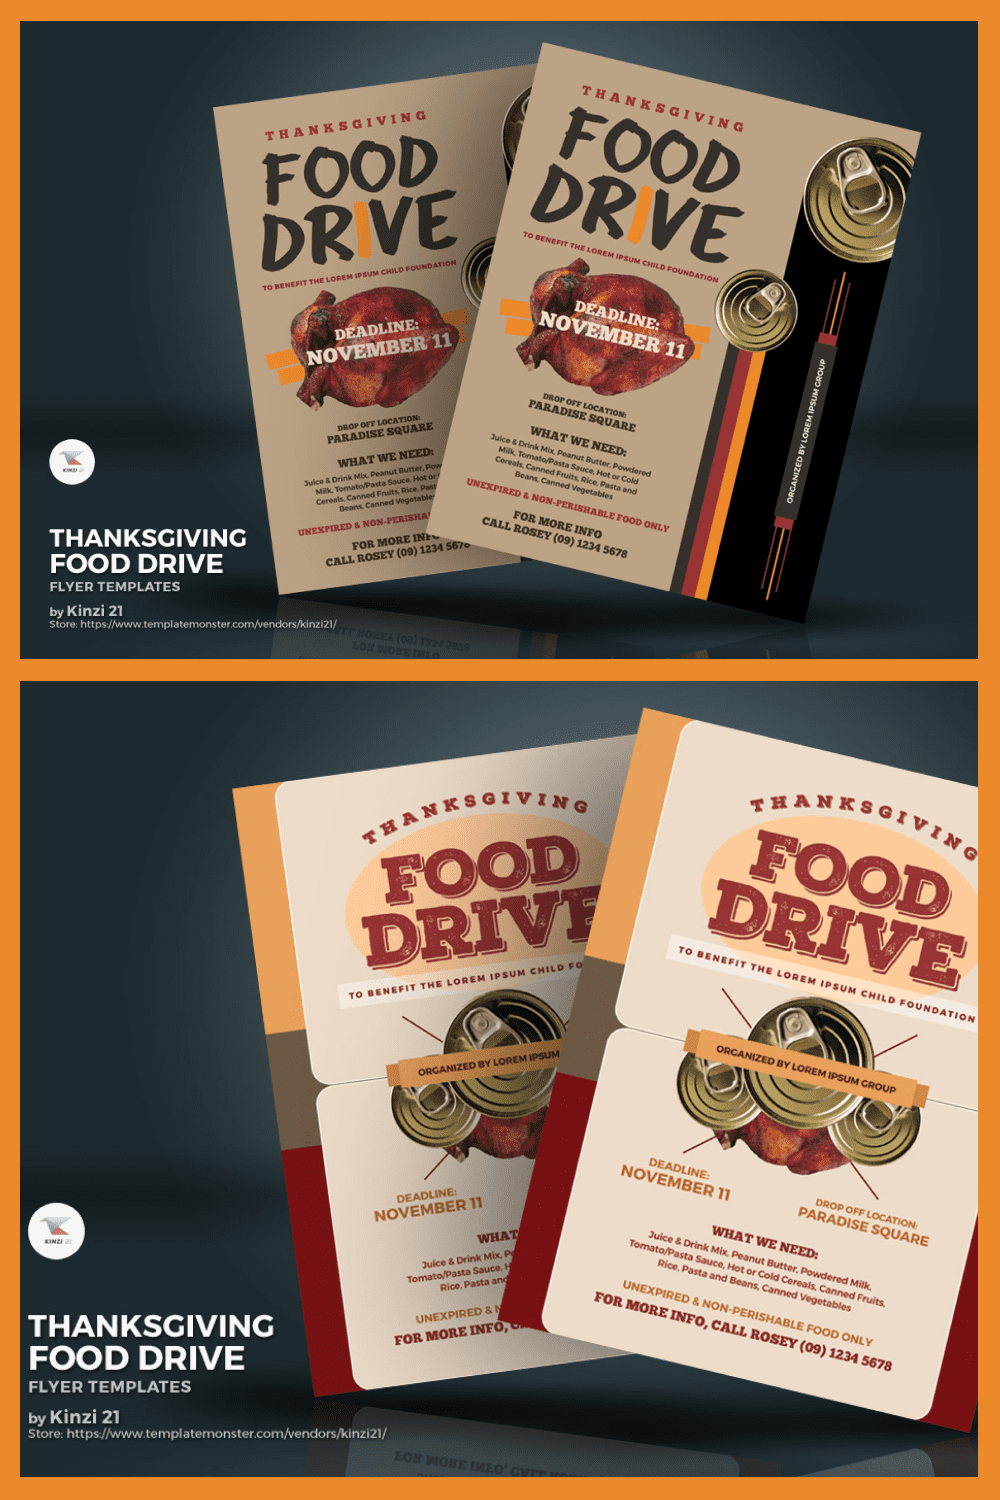 Thanksgiving food drive flyer corporate identity template.